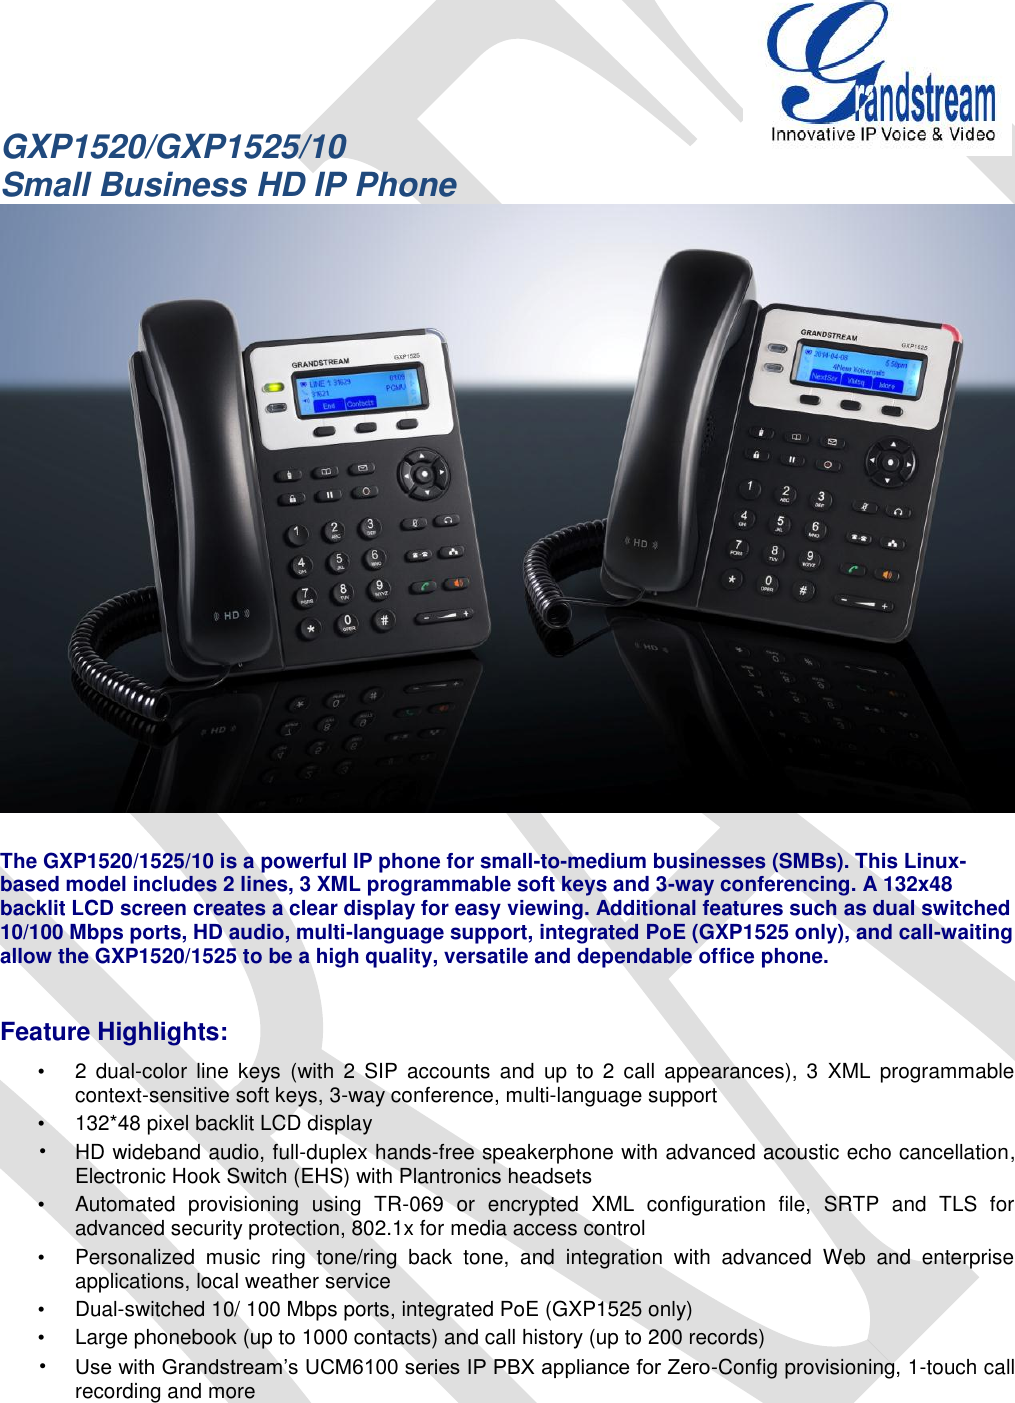   GXP1520/GXP1525/10 Small Business HD IP Phone   The GXP1520/1525/10 is a powerful IP phone for small-to-medium businesses (SMBs). This Linux-based model includes 2 lines, 3 XML programmable soft keys and 3-way conferencing. A 132x48 backlit LCD screen creates a clear display for easy viewing. Additional features such as dual switched 10/100 Mbps ports, HD audio, multi-language support, integrated PoE (GXP1525 only), and call-waiting allow the GXP1520/1525 to be a high quality, versatile and dependable office phone.  Feature Highlights: •  2  dual-color  line  keys  (with  2  SIP  accounts  and  up  to  2  call  appearances),  3  XML  programmable context-sensitive soft keys, 3-way conference, multi-language support •  132*48 pixel backlit LCD display • HD wideband audio, full-duplex hands-free speakerphone with advanced acoustic echo cancellation, Electronic Hook Switch (EHS) with Plantronics headsets •  Automated  provisioning  using  TR-069  or  encrypted  XML  configuration  file,  SRTP  and  TLS  for advanced security protection, 802.1x for media access control •  Personalized  music  ring  tone/ring  back  tone,  and  integration  with  advanced  Web  and  enterprise applications, local weather service •  Dual-switched 10/ 100 Mbps ports, integrated PoE (GXP1525 only) •  Large phonebook (up to 1000 contacts) and call history (up to 200 records) • Use with Grandstream’s UCM6100 series IP PBX appliance for Zero-Config provisioning, 1-touch call recording and more 